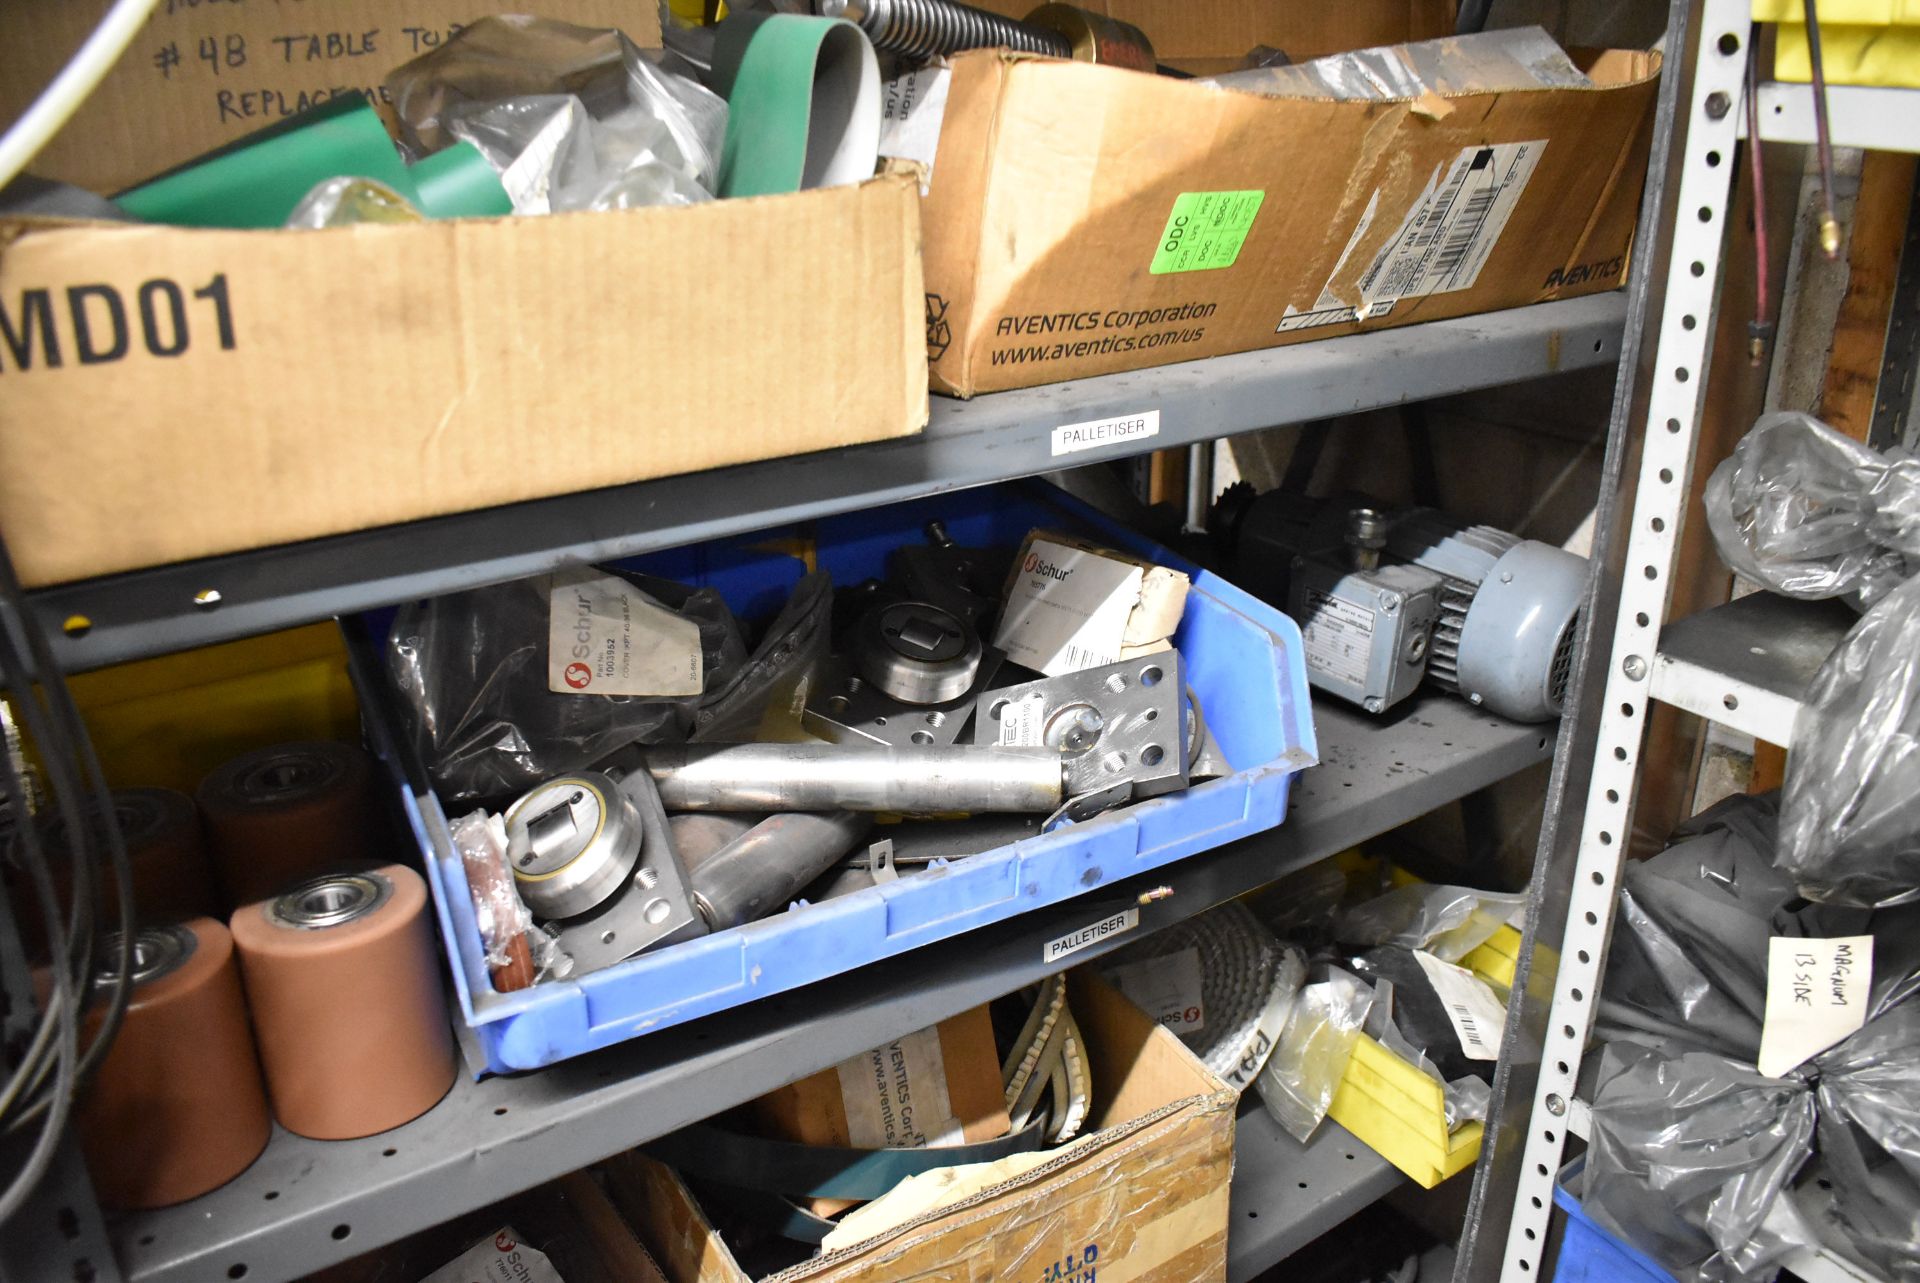 LOT/ (5) SECTIONS OF STEEL SHELVING WITH CONTENTS - INCLUDING BEARINGS, DRIVE BELTS, GAUGES, - Image 21 of 26